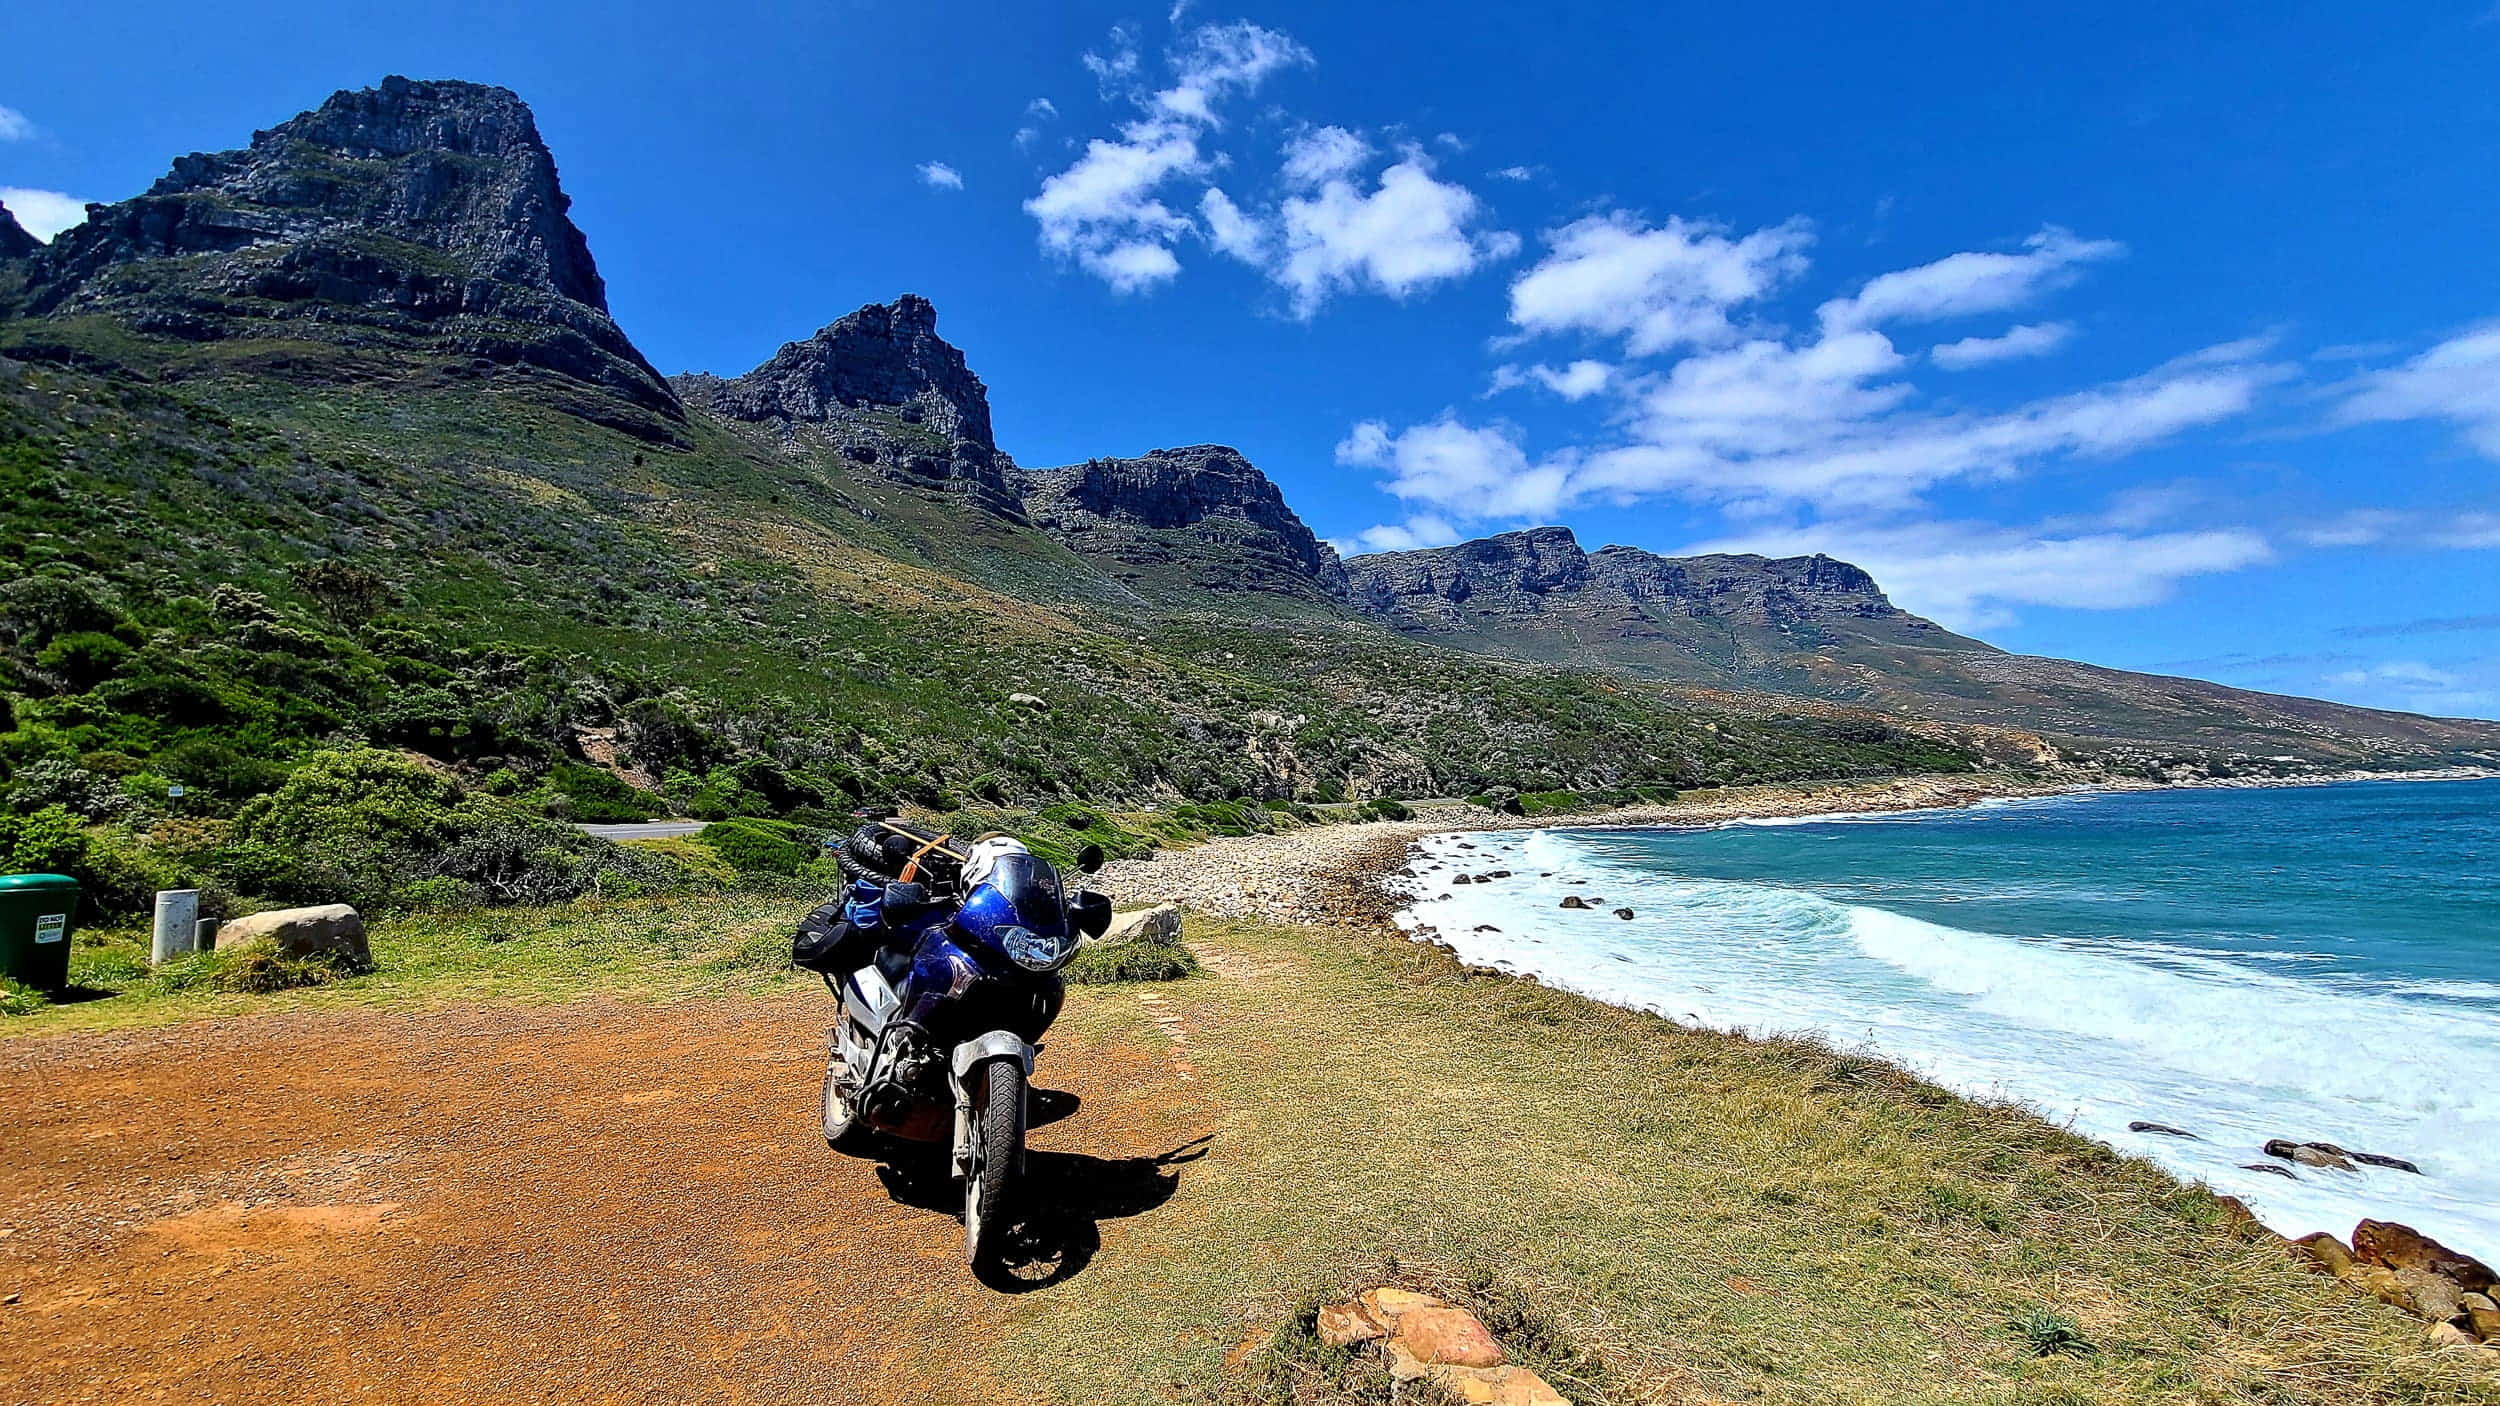 motorcycle parked with steep mountains descending into a blue ocean